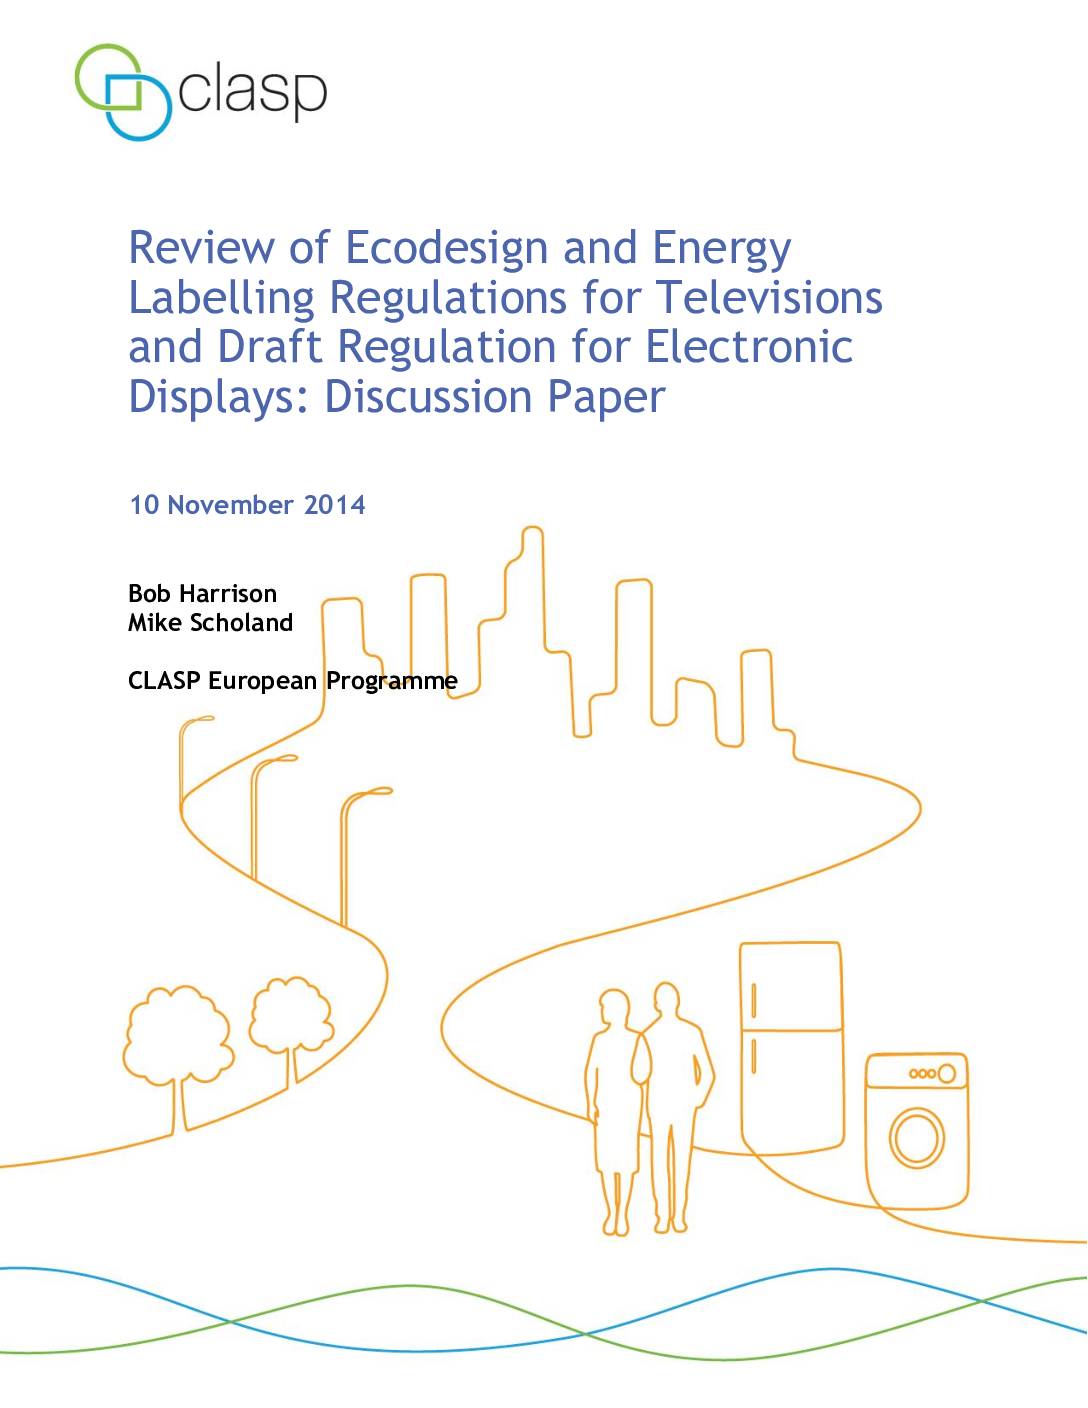 Review of Ecodesign and Energy Labelling Regulations for Televisions and Draft Regulation for Electronic Displays: Discussion Paper